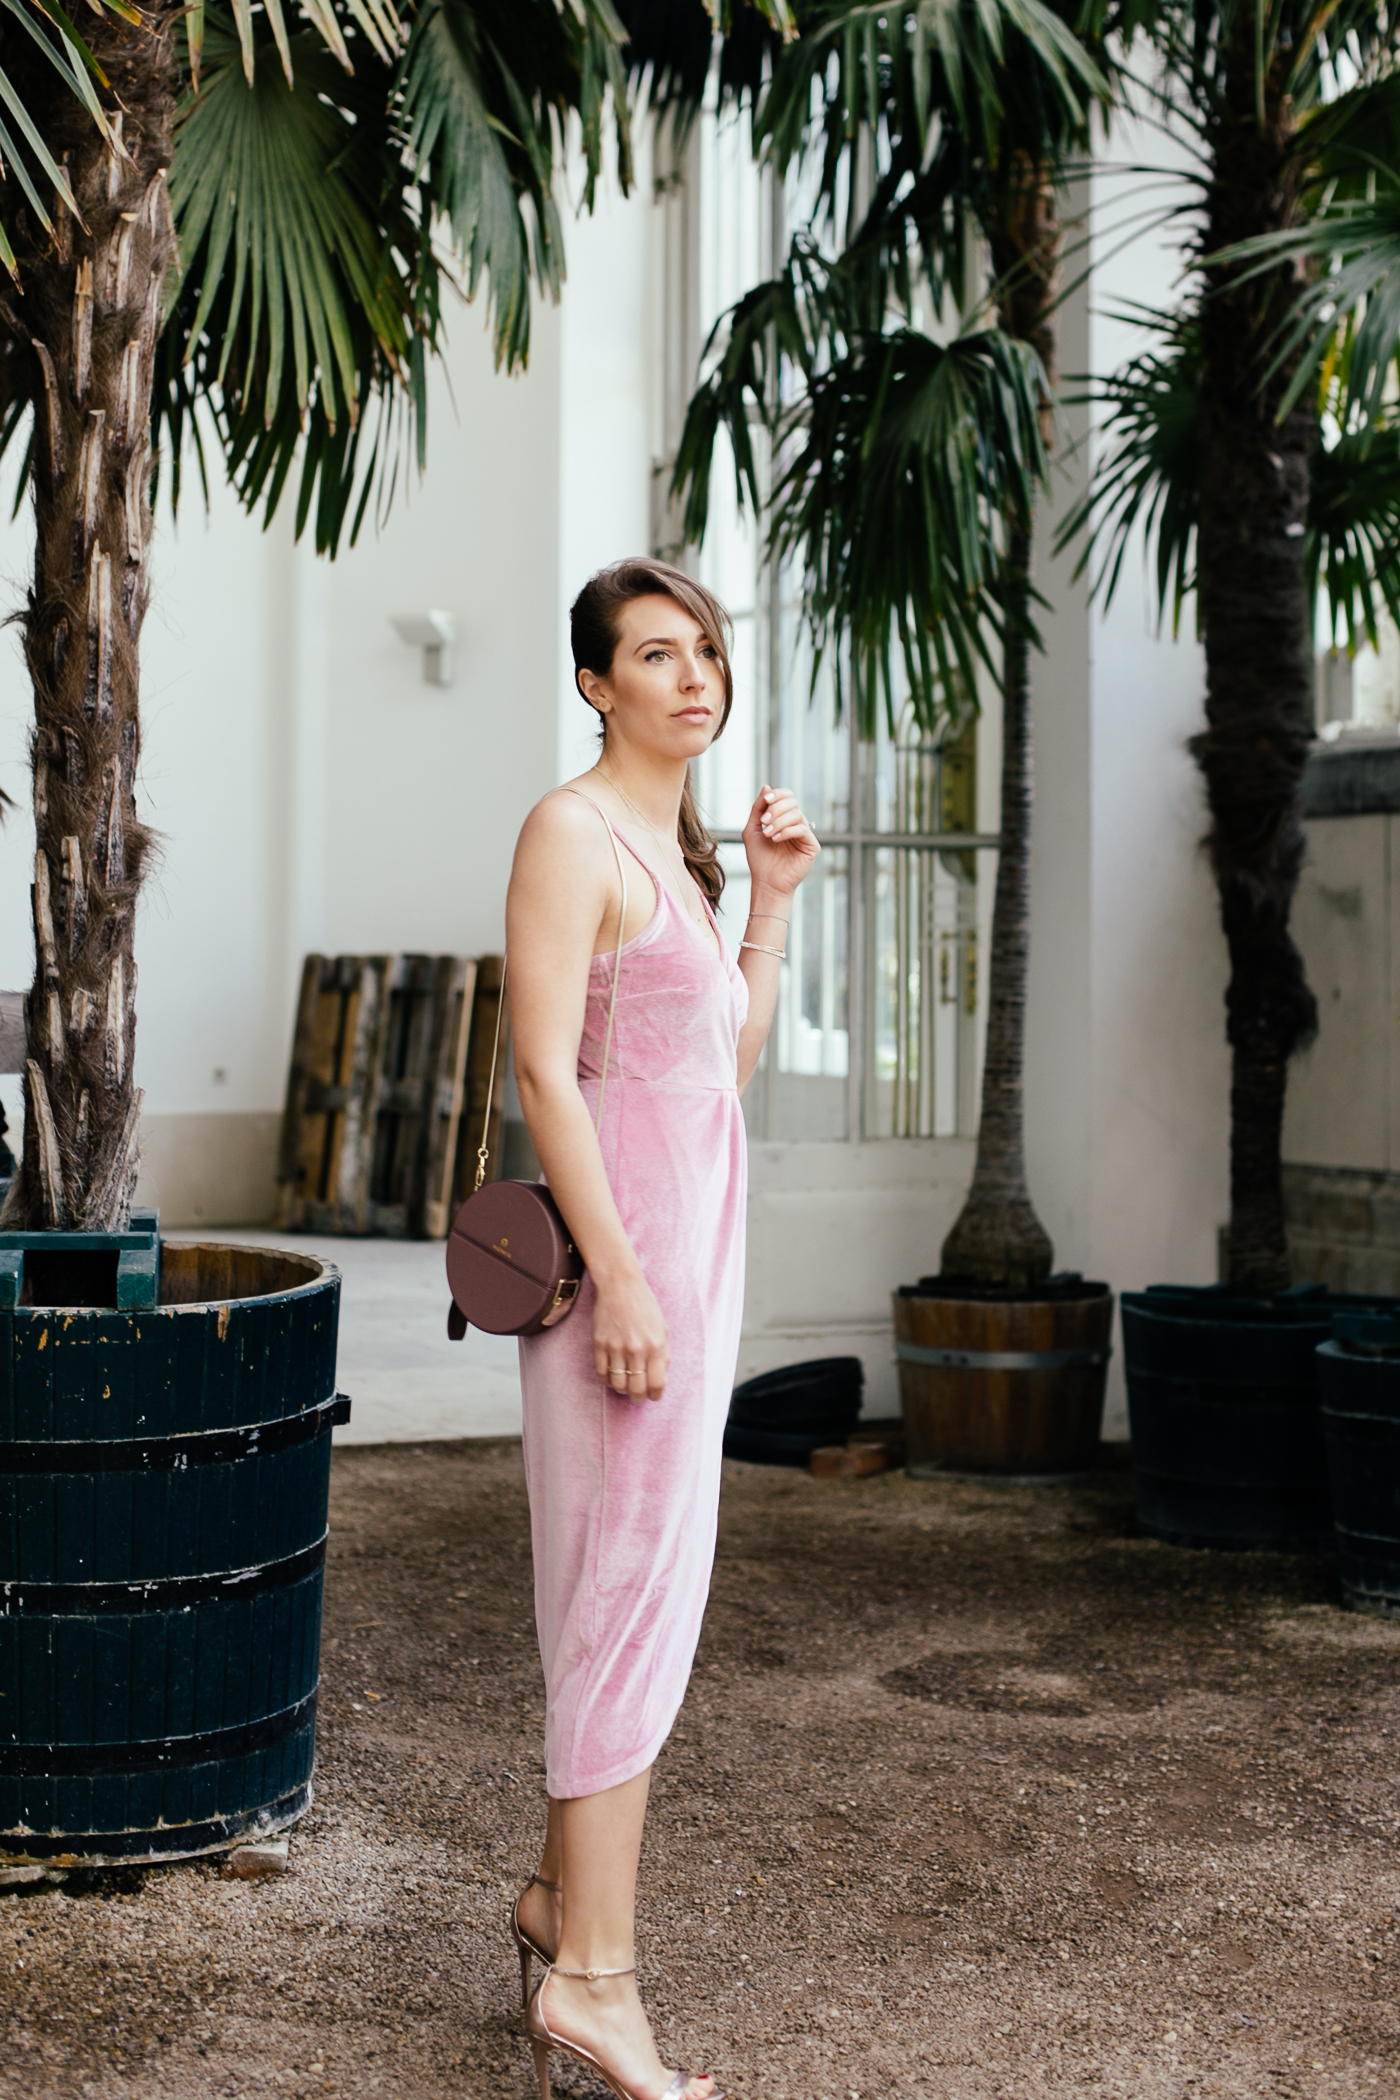 Hochzeitsgast Outfit - EDITED Wedding Guest | Love Daily Dose